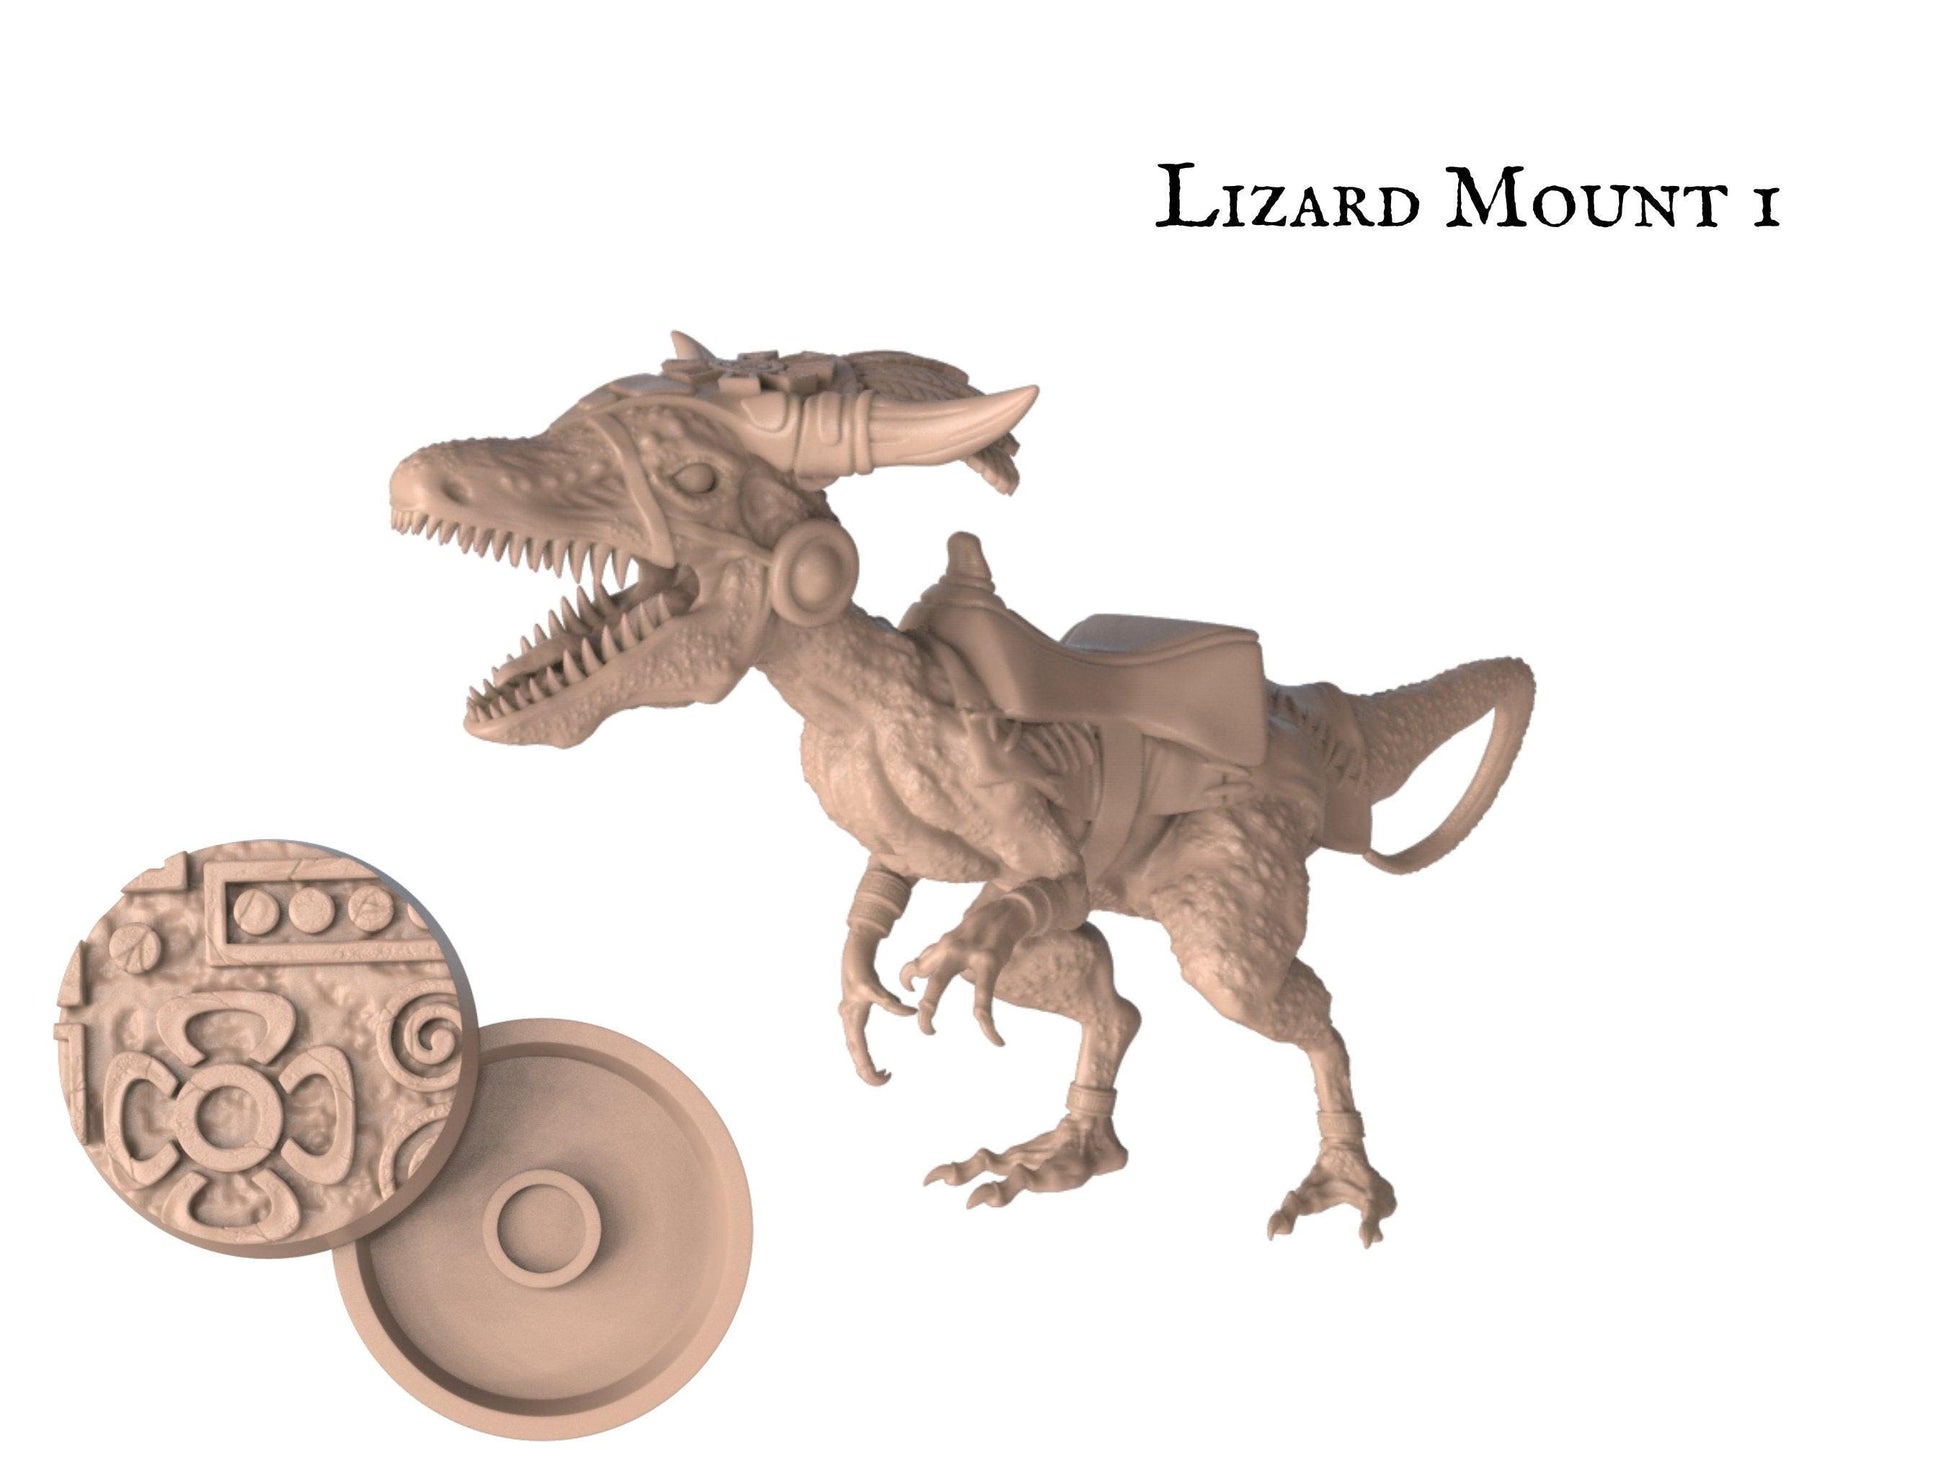 DnD Lizard Mount - 25mm base | 32mm scale | Tabletop gaming DnD Miniature Dungeons and Dragons,dnd monster manual - Plague Miniatures shop for DnD Miniatures